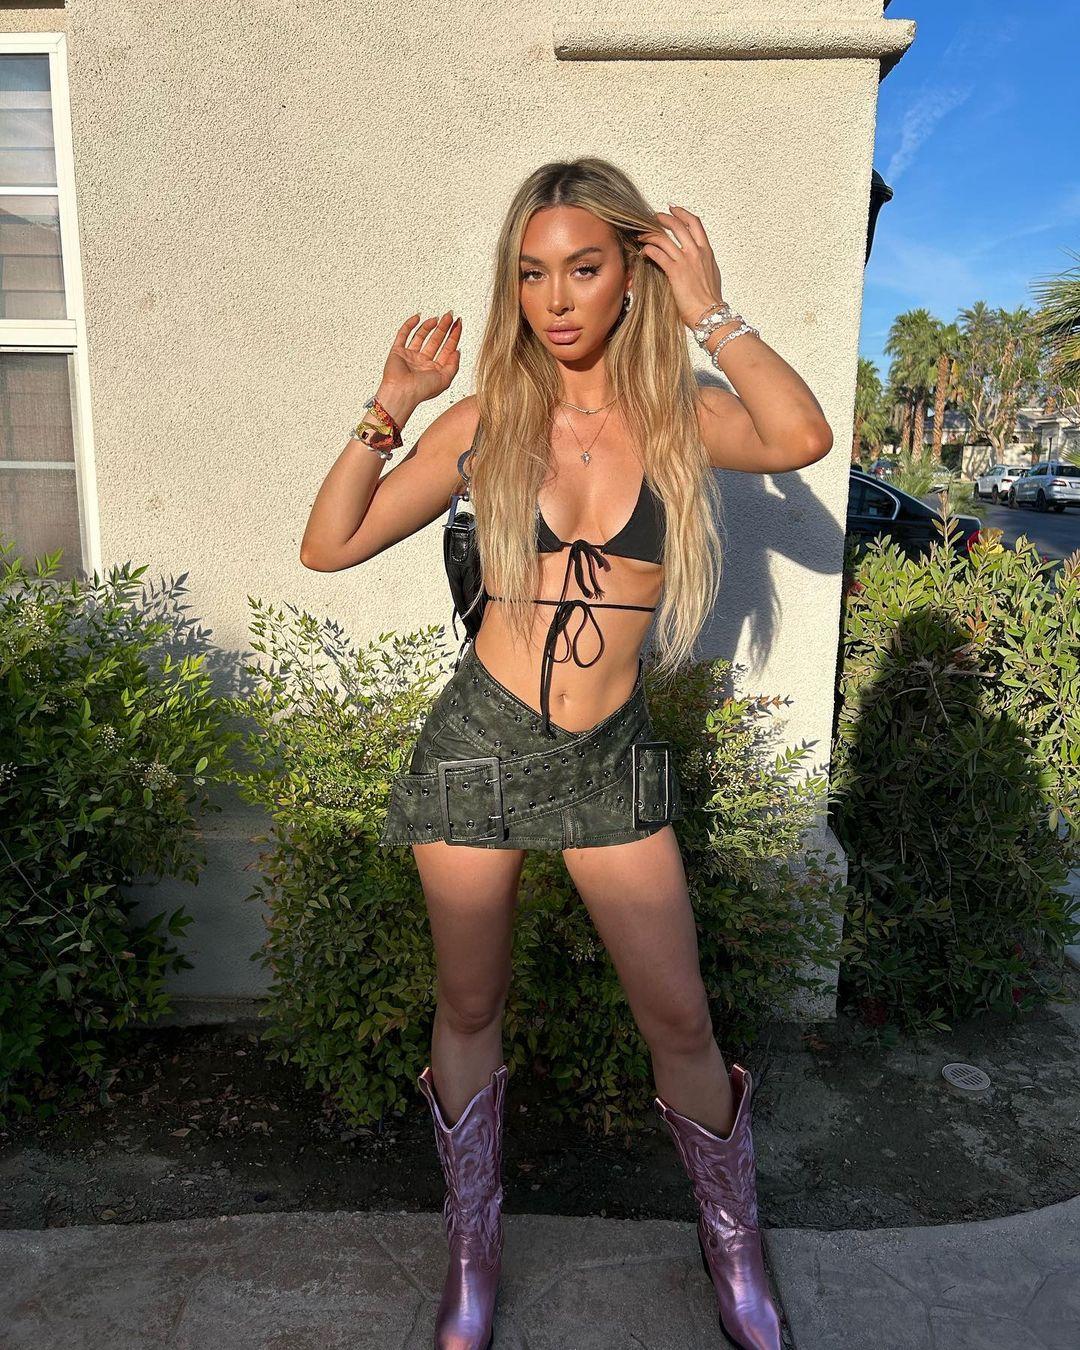 Corinne Olympios Brings The Heat To Stagecoach In Skimpy Outfit